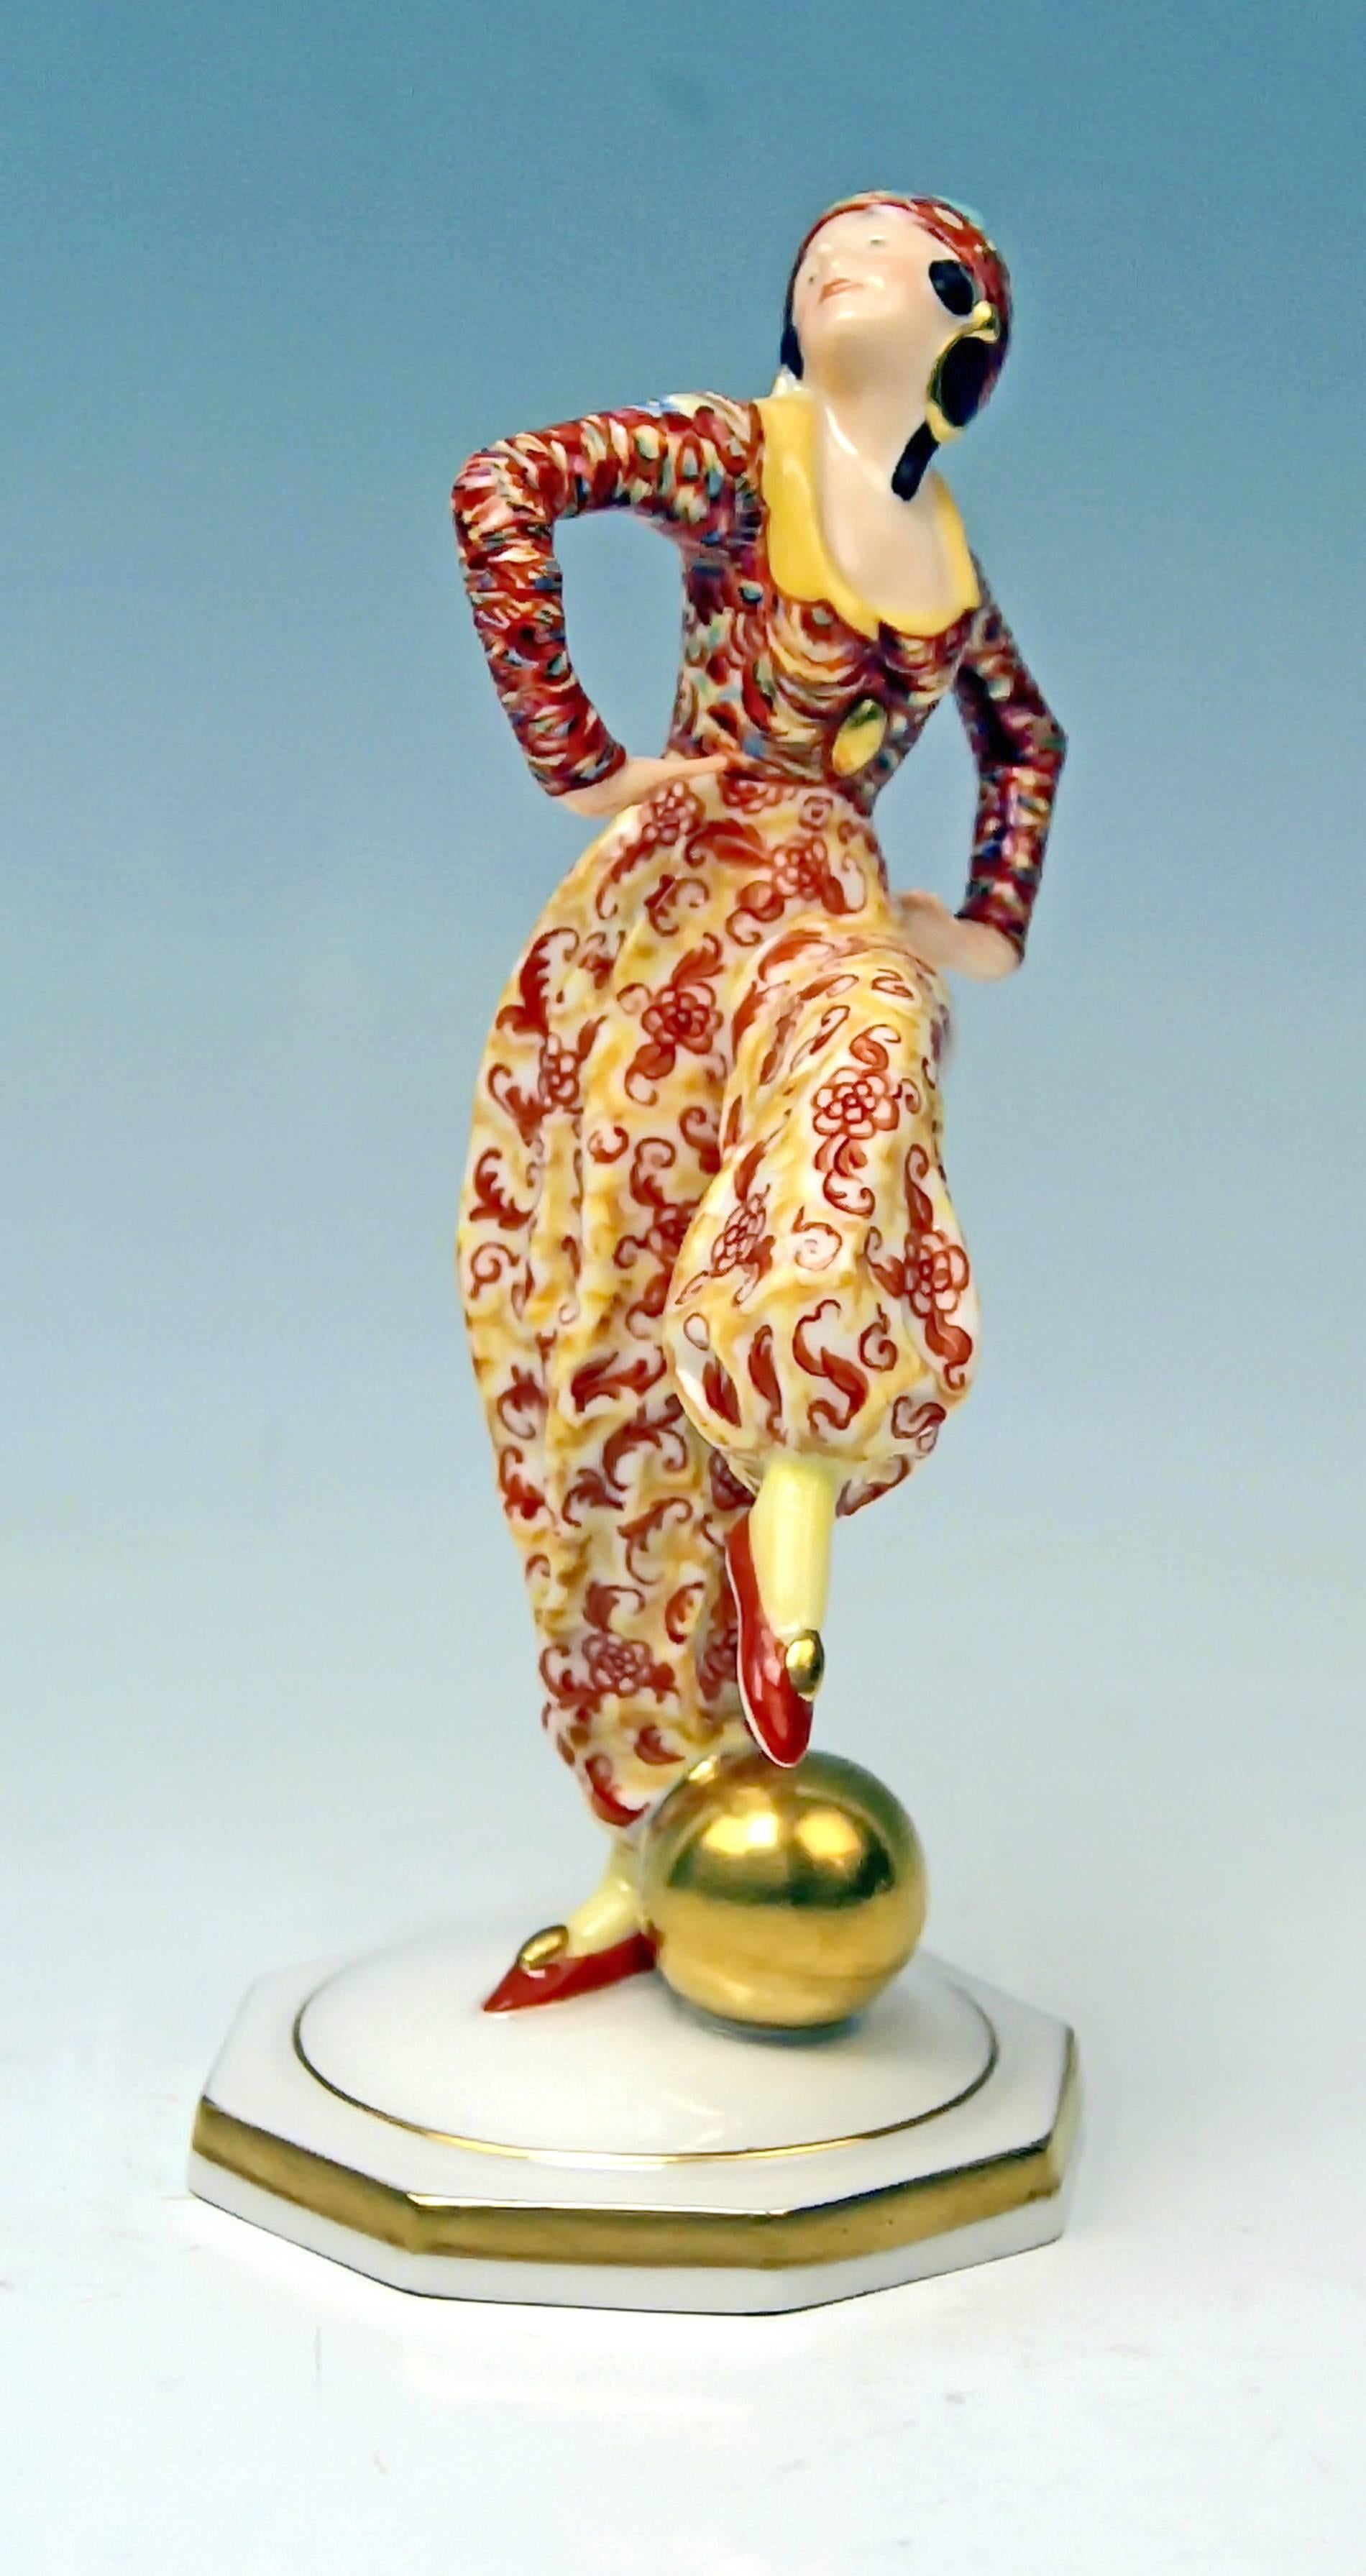 Hutschenreuther quite rare figurine of lady:
A gorgeous lady dancer - called 'oriental dancer' - wearing so-said harem pants as well as close-fitting / body-fitting jacket balances on her right leg while left leg - being sprawled out - is bent /